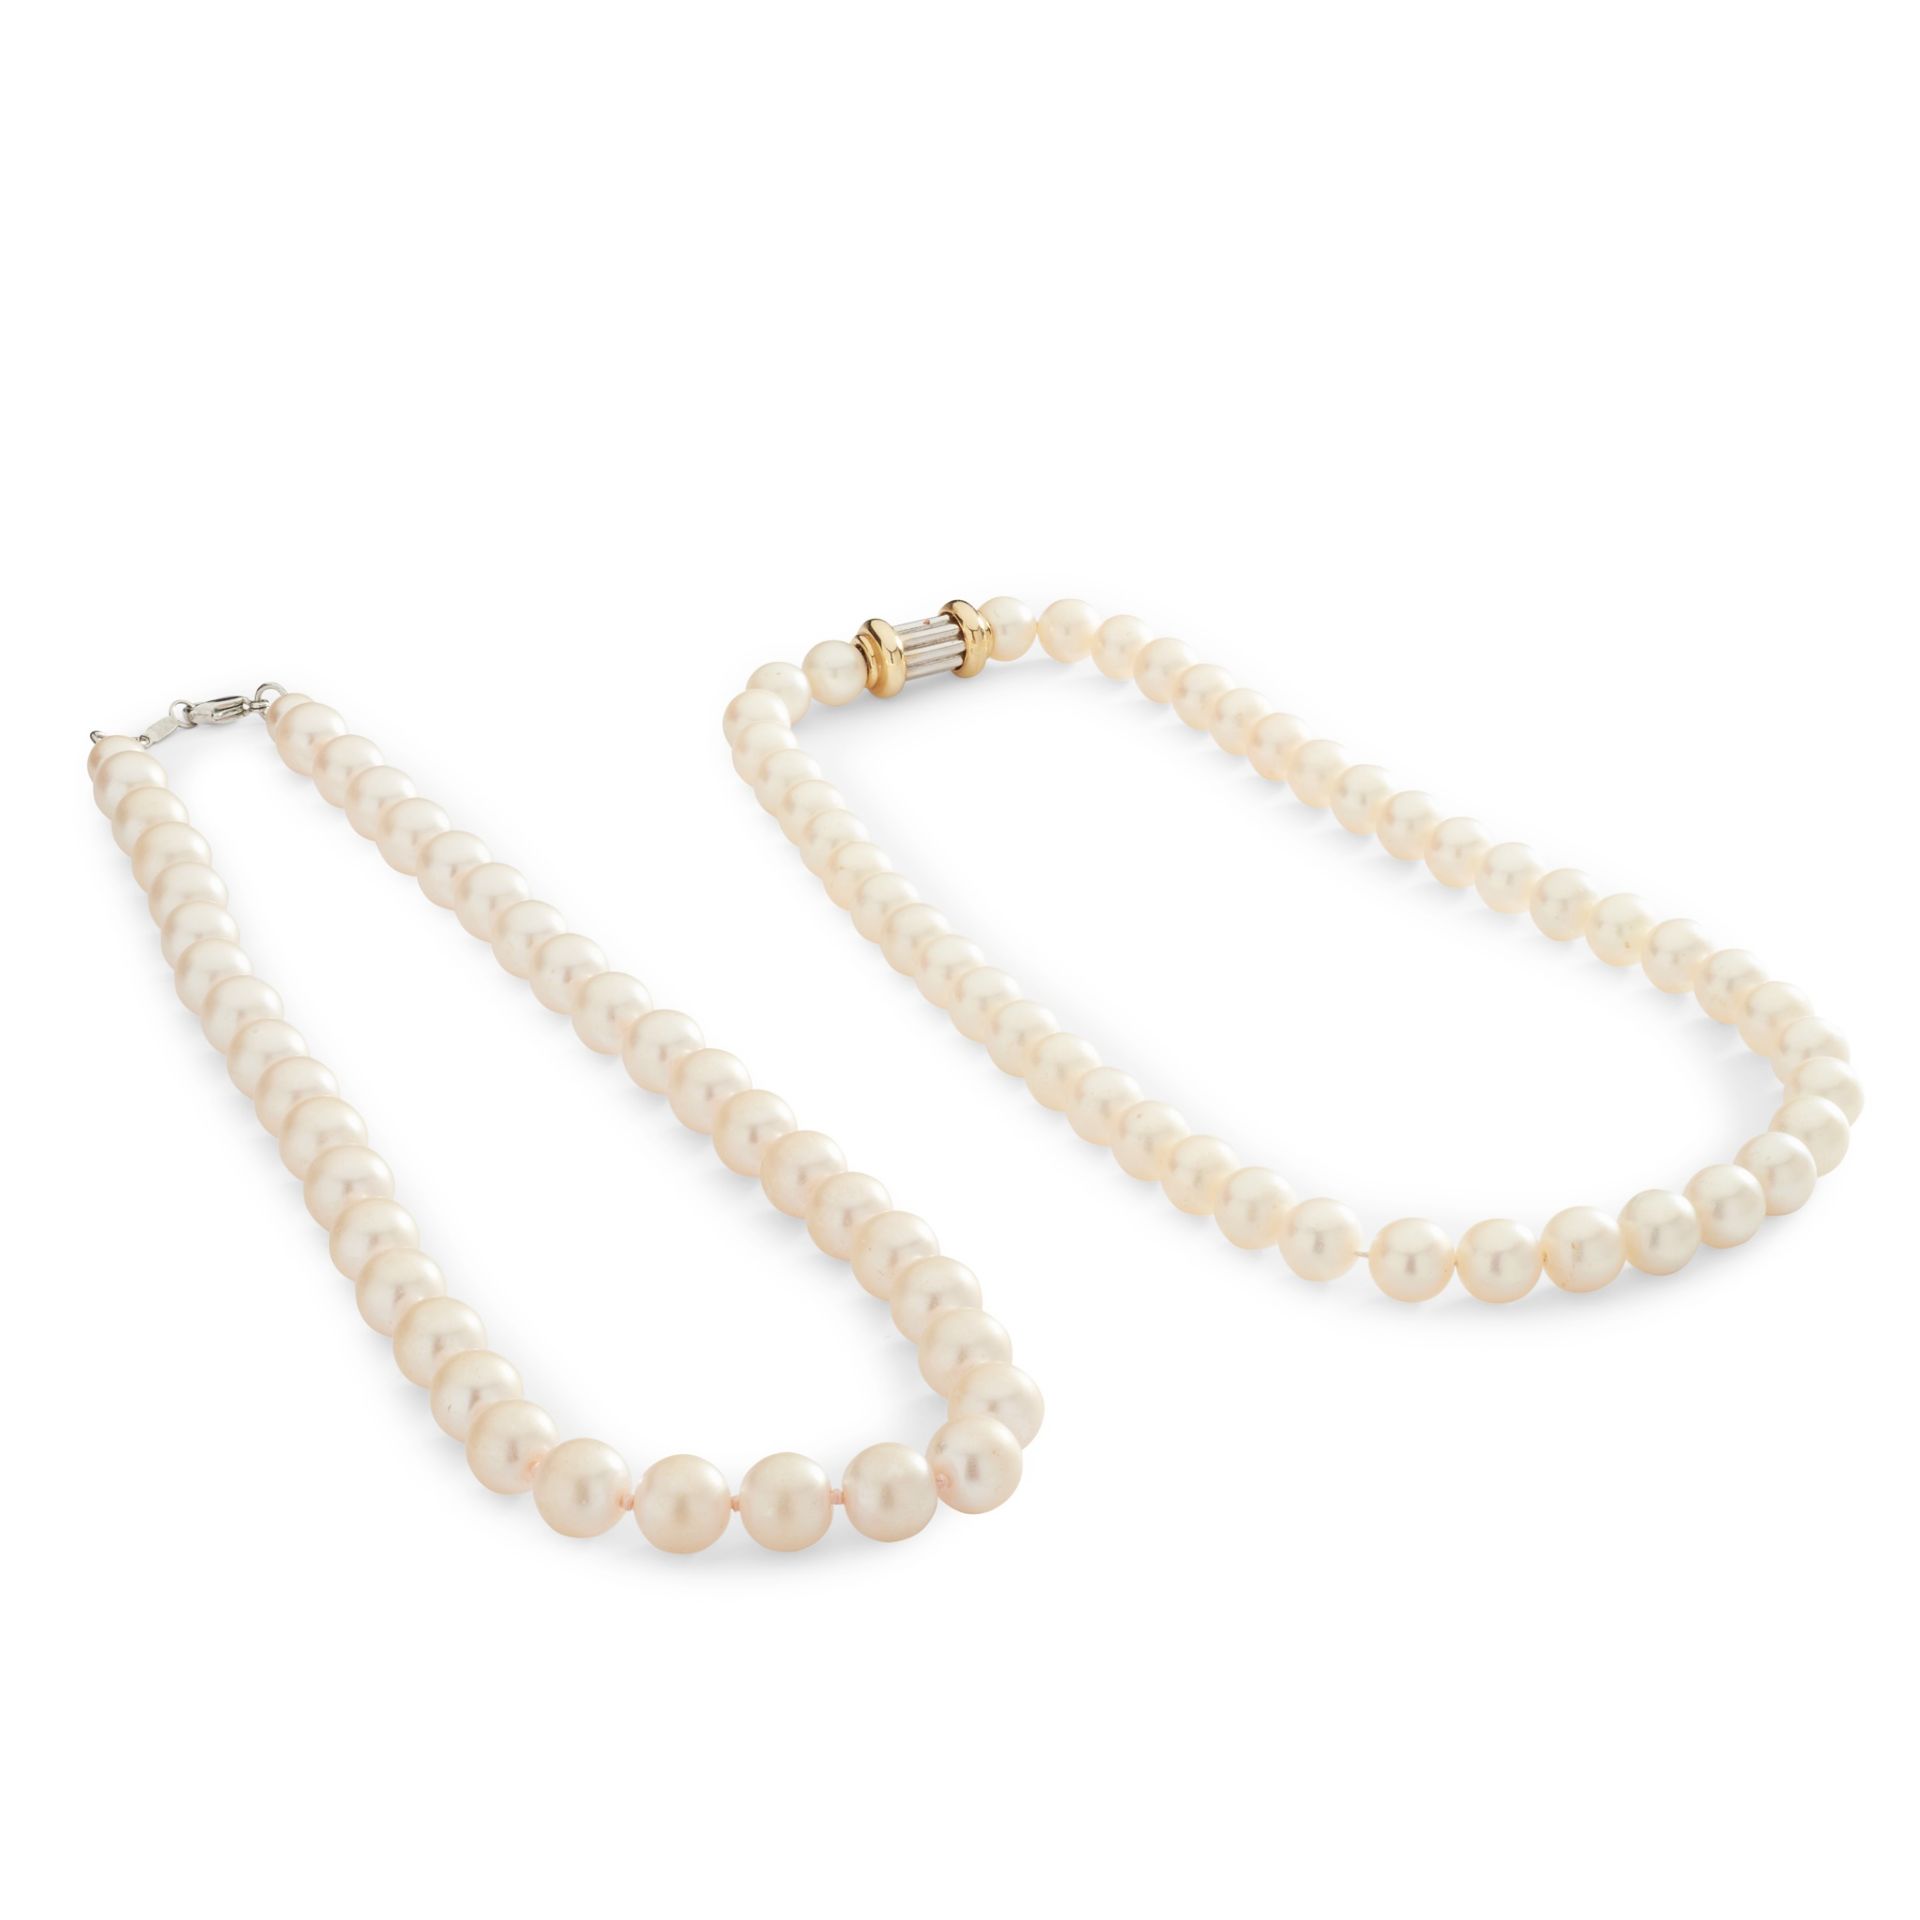 Two cultured pearl necklaces